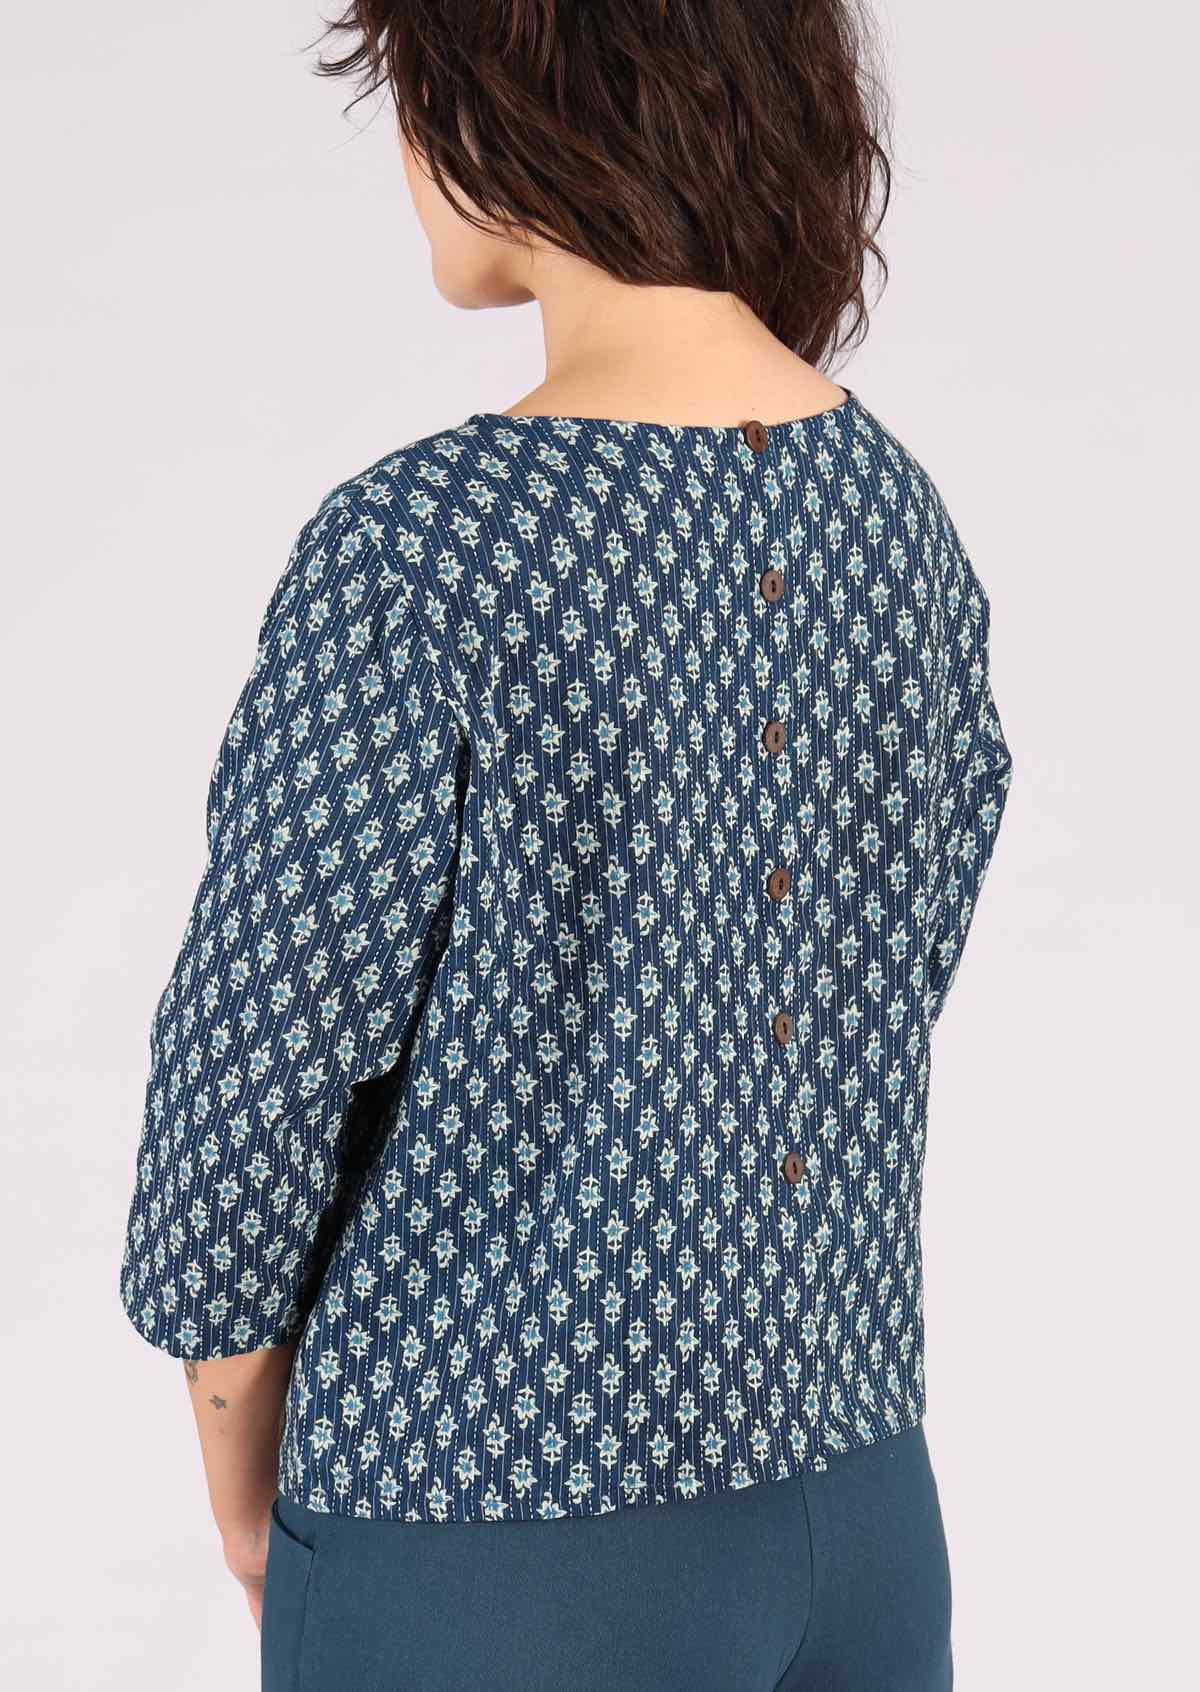 Blue cotton top features brown non-functional buttons down the back. 